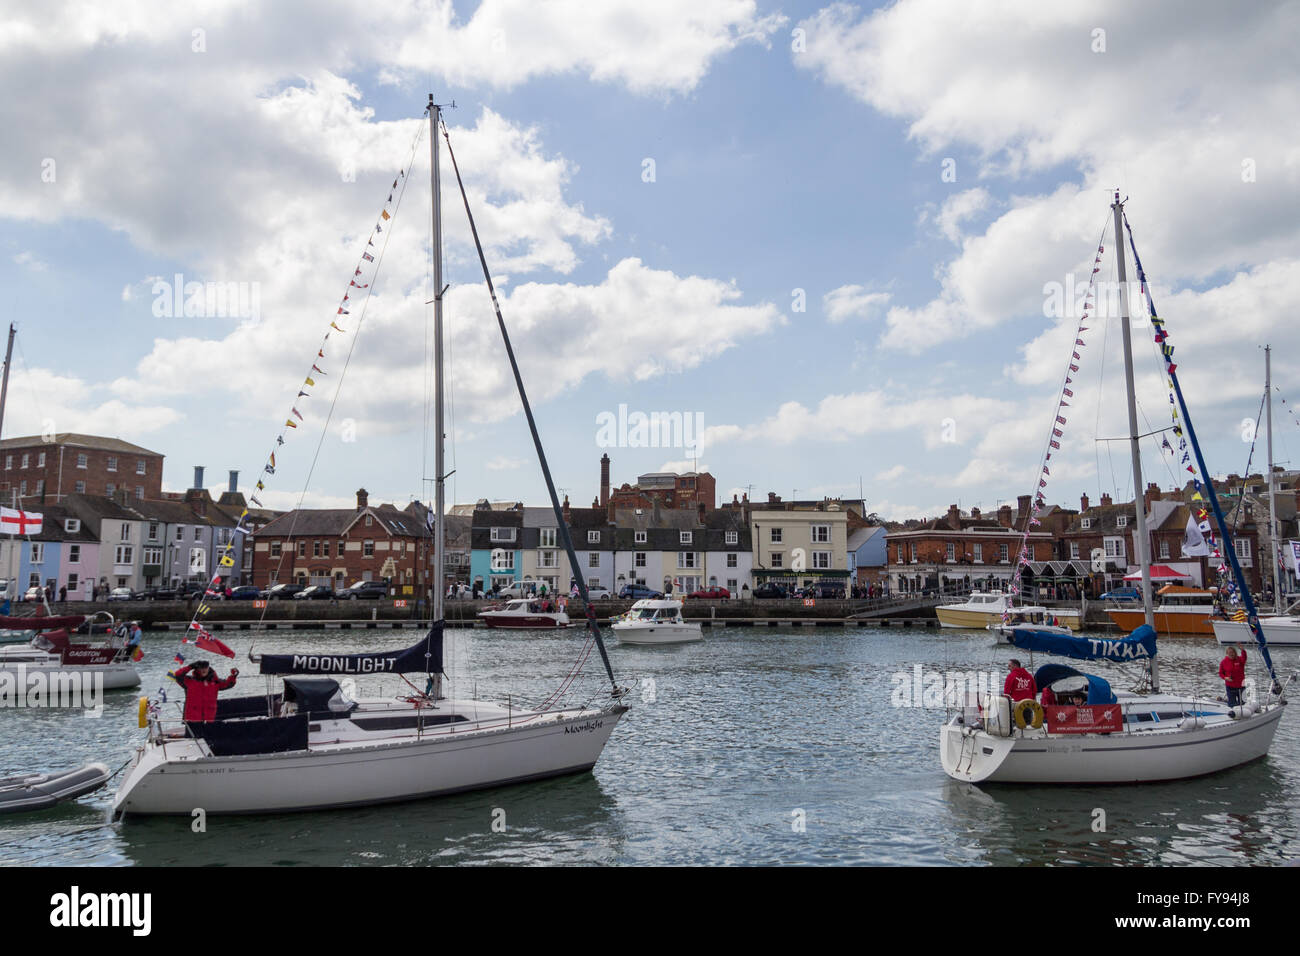 Weymouth, England. 23 April 2016. Queen's 90th Birthday Floating Tribute. Moonlight and Tikka. Credit:  Frances Underwood/Alamy Live News Stock Photo